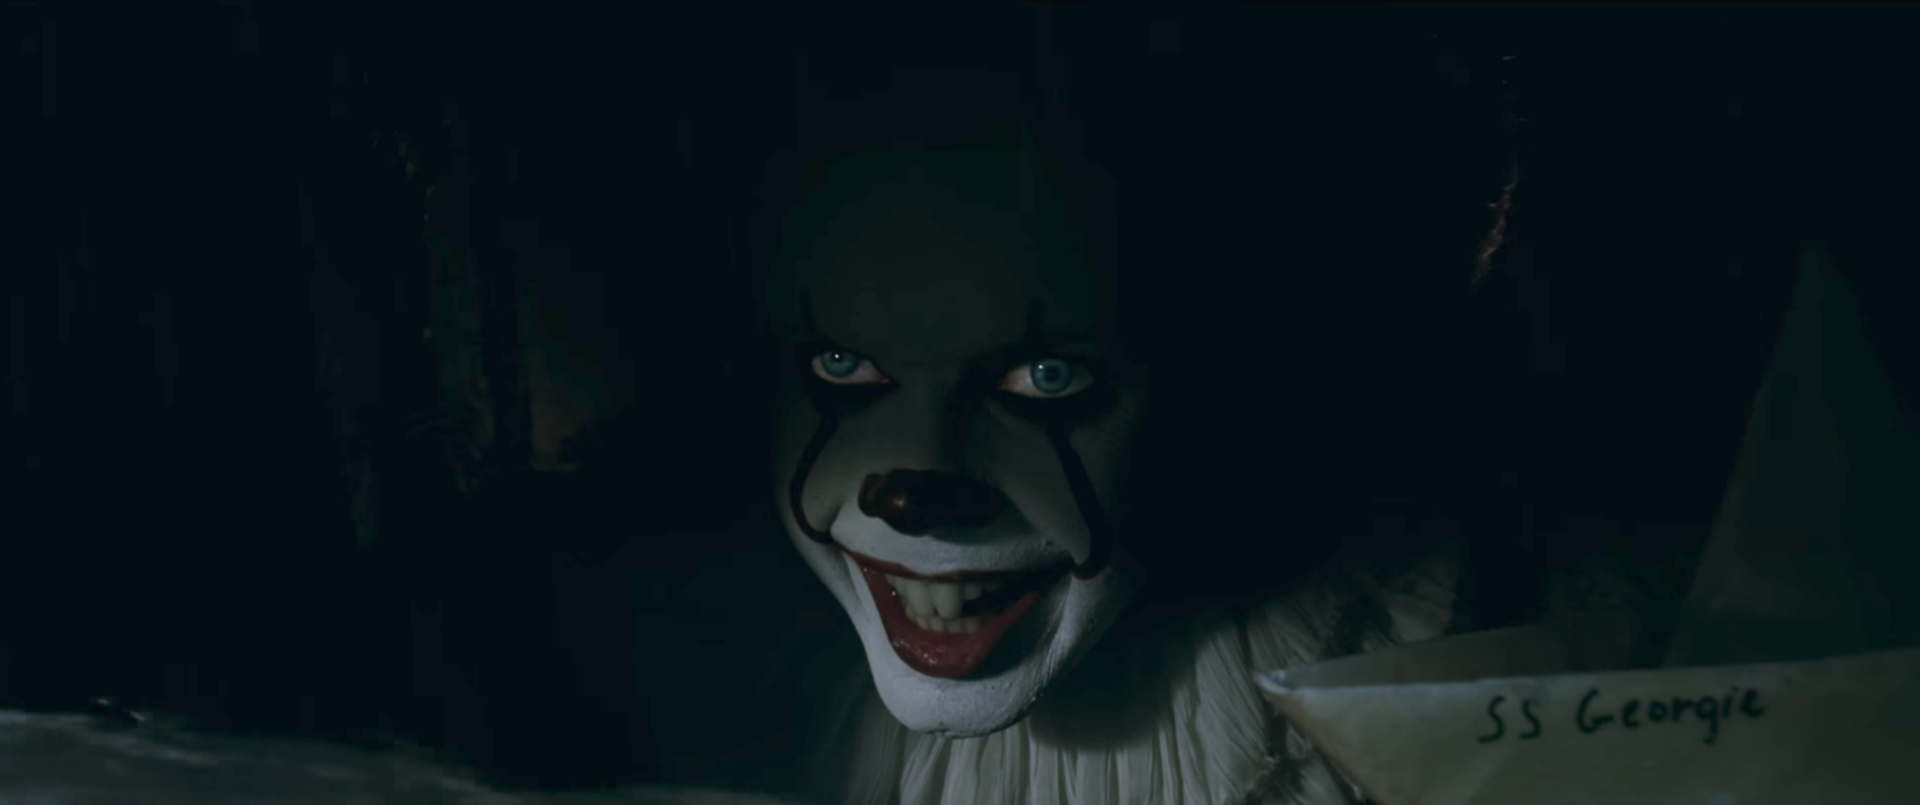 Pennywise The Clown is horrifying in latest trailer for ‘IT’